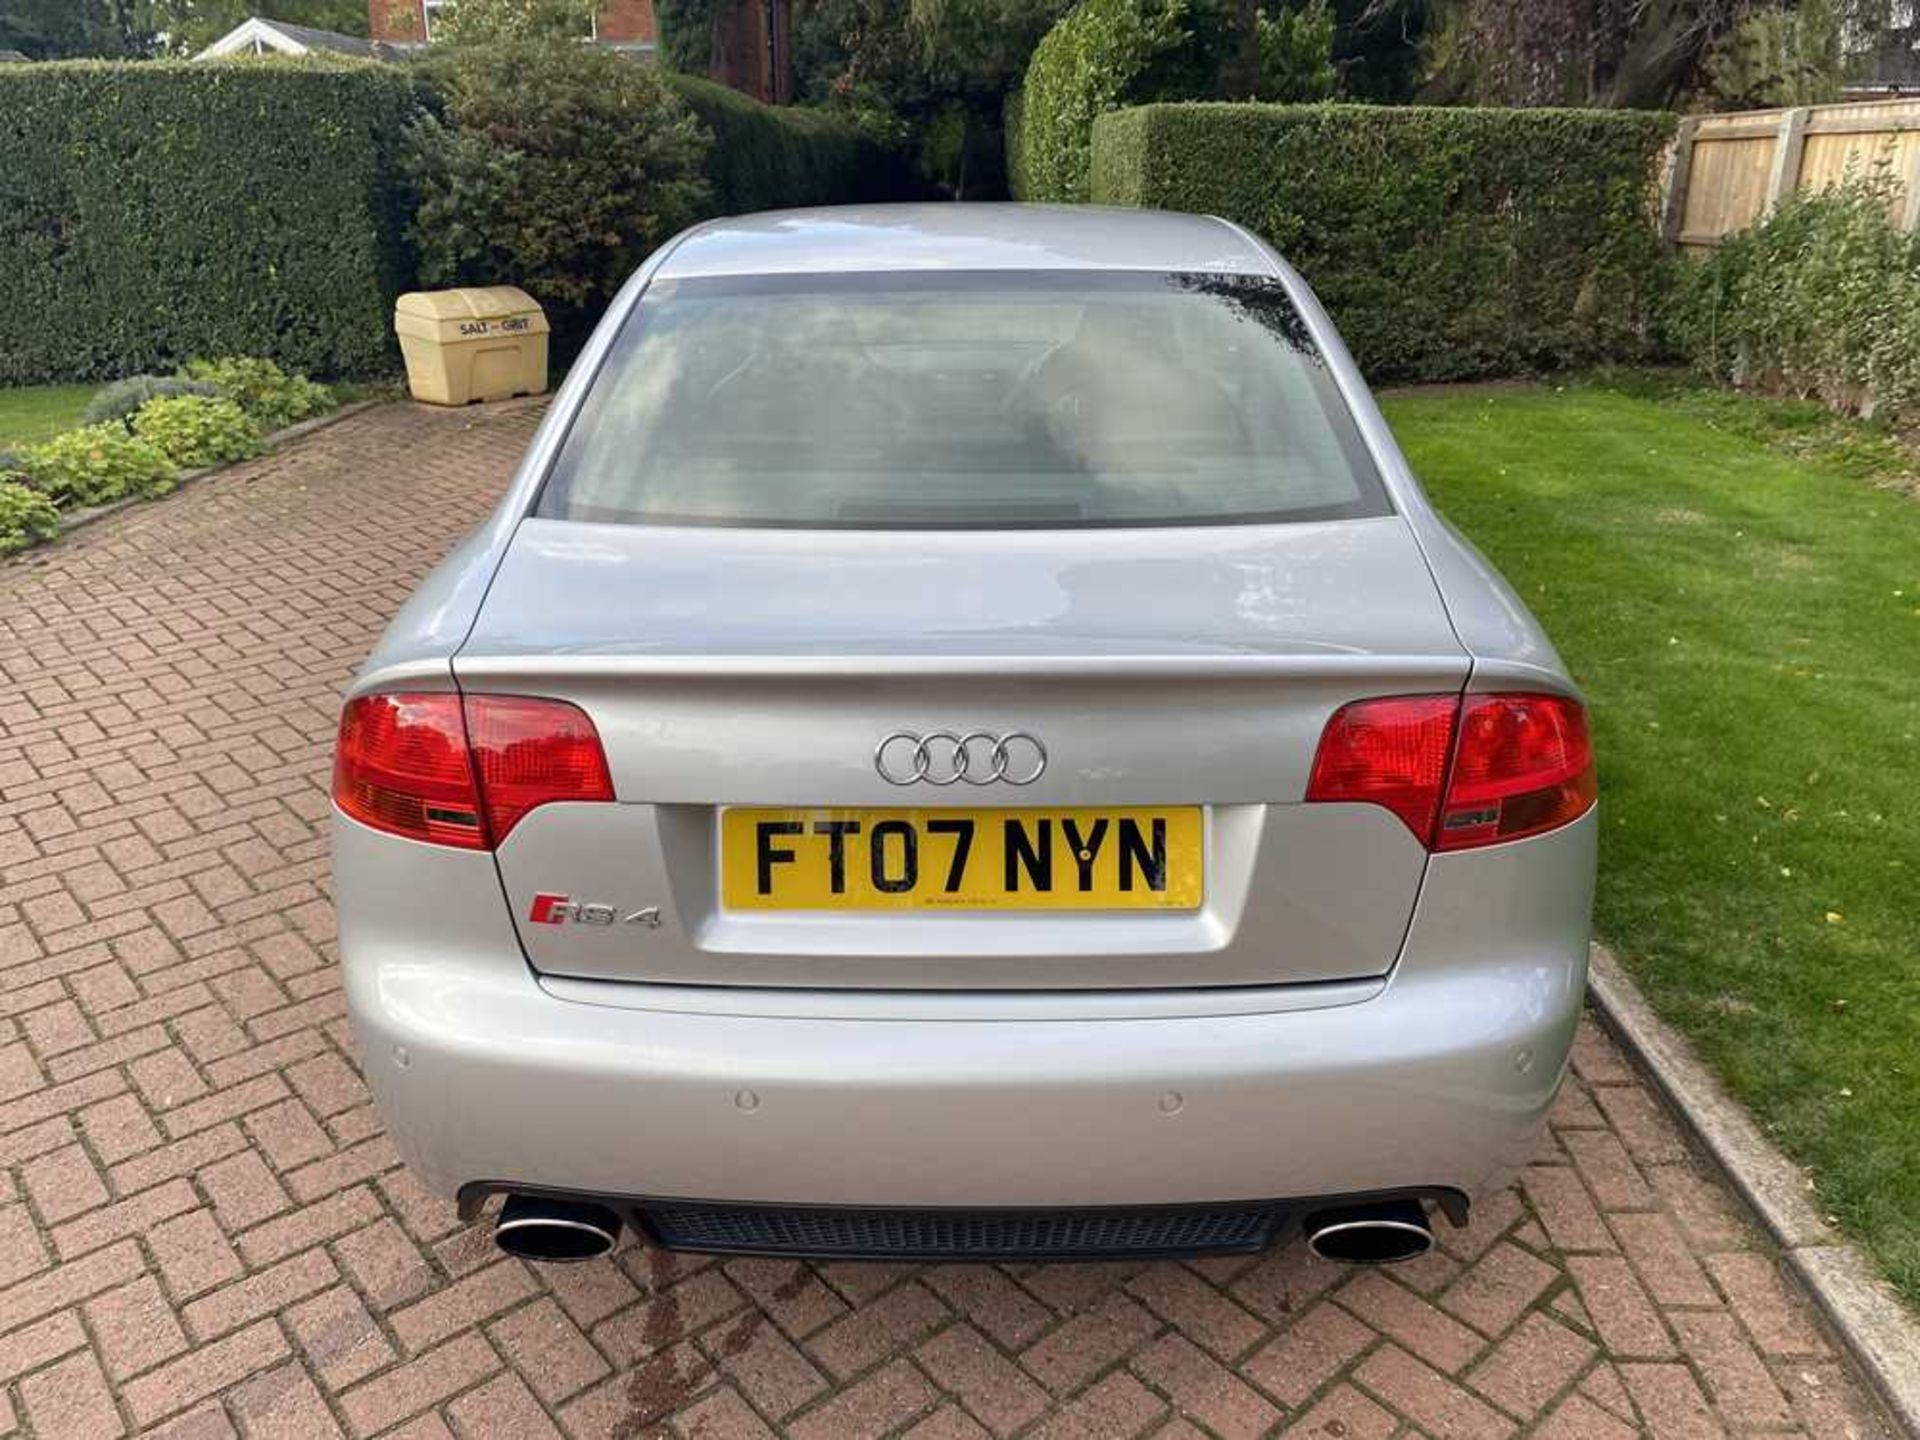 2007 Audi RS4 Saloon One owner and just c.60,000 miles from new - Image 16 of 86